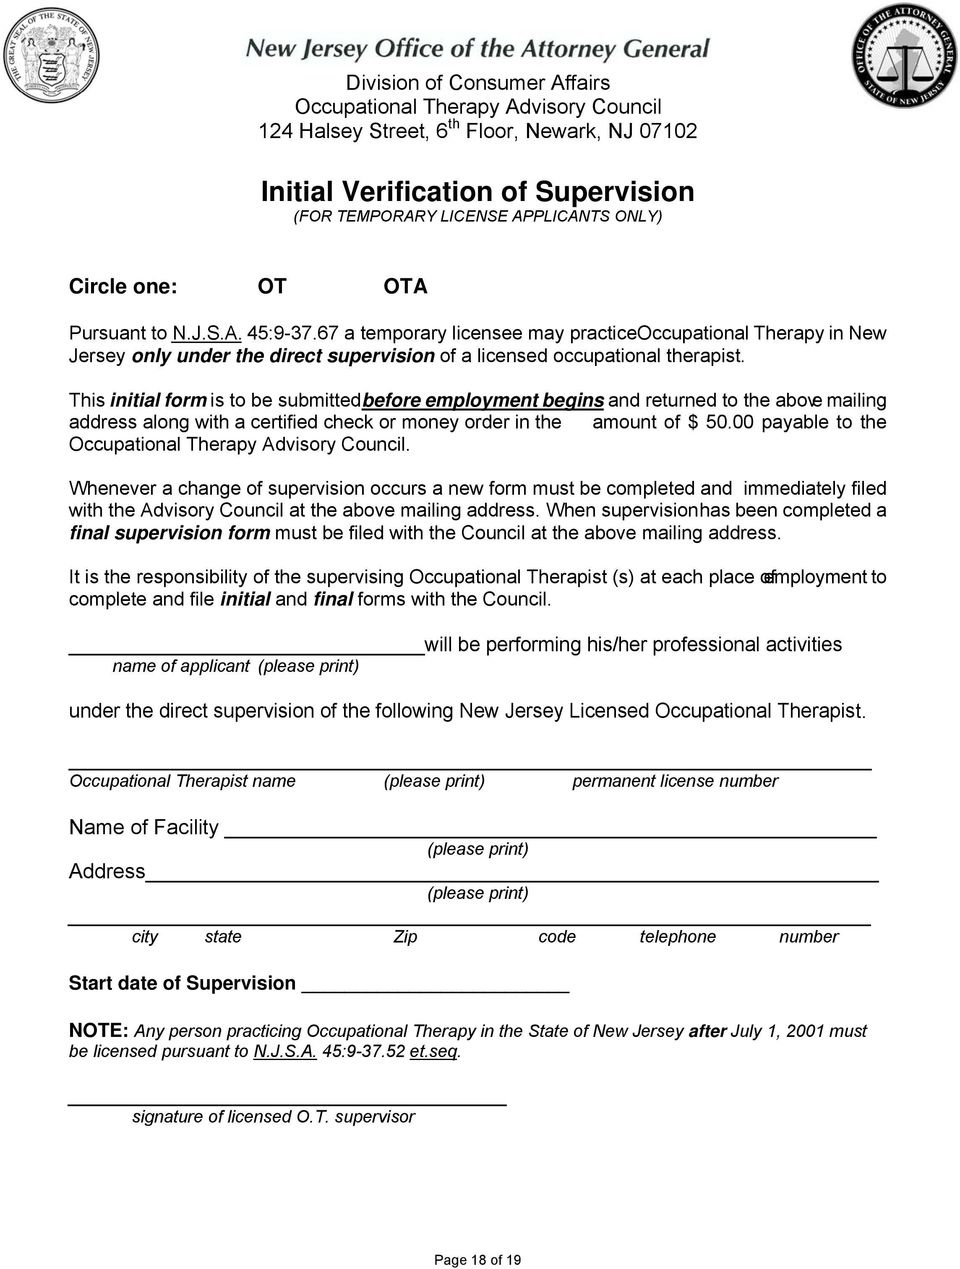 This initial form is to be submitted before employment begins and returned to the above mailing address along with a certified check or money order in the amount of $ 50.00 payable to the.